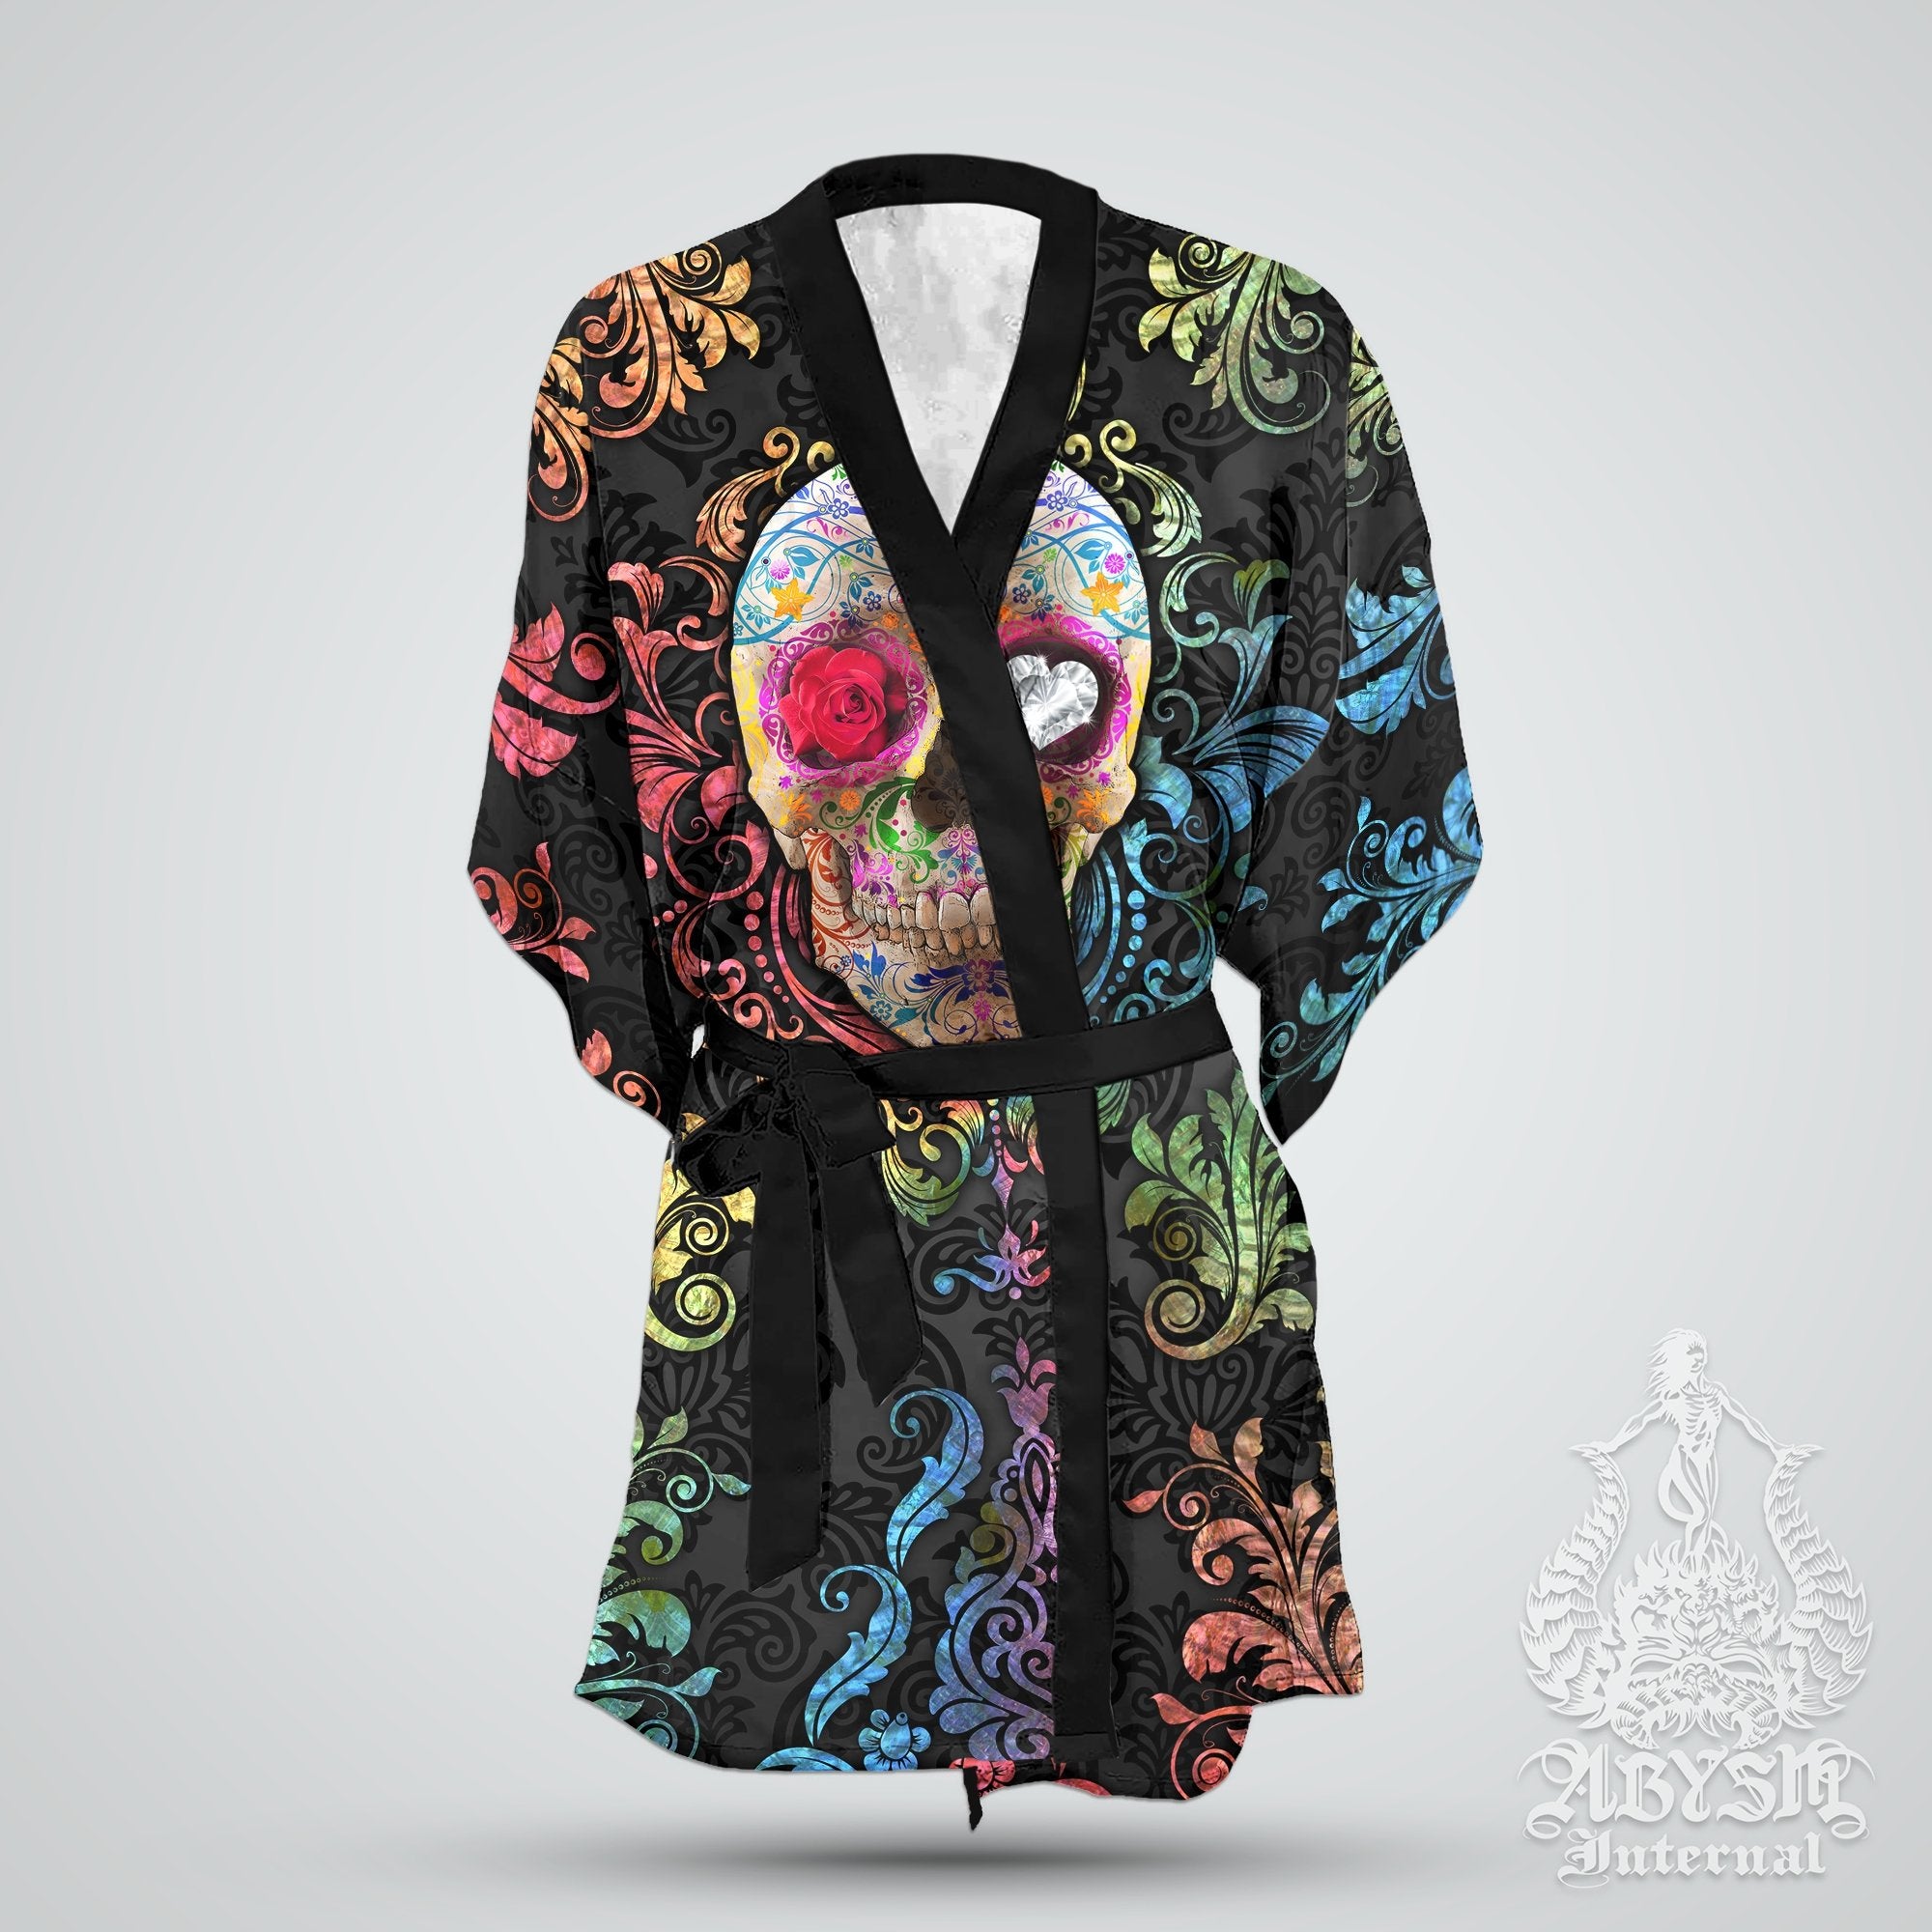 Sugar Skull Cover Up, Beach Outfit, Party Kimono, Boho Summer Festival Robe, Indie and Alternative Clothing, Unisex - Day of the Dead - Abysm Internal